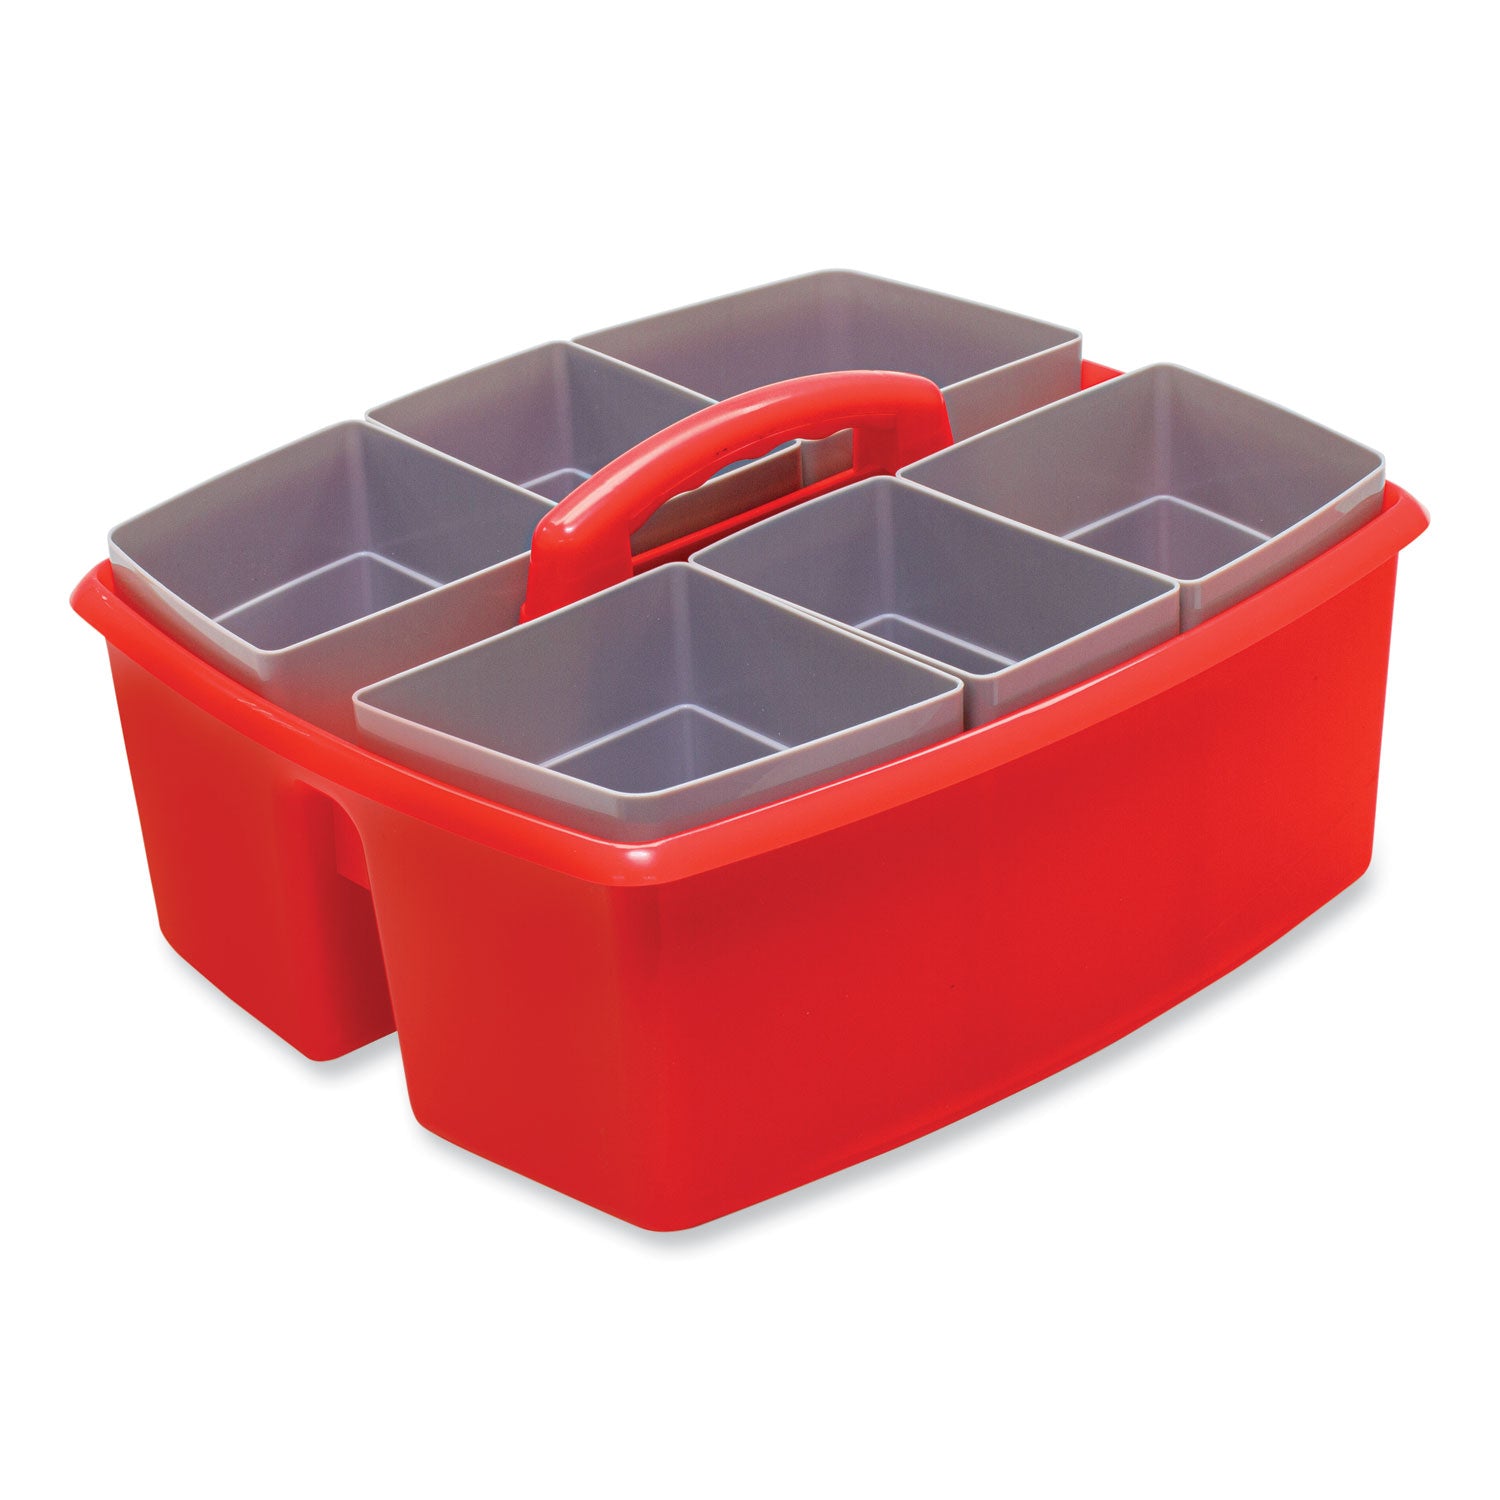 large-caddy-with-sorting-cups-red-2-carton_stx00981u02c - 1